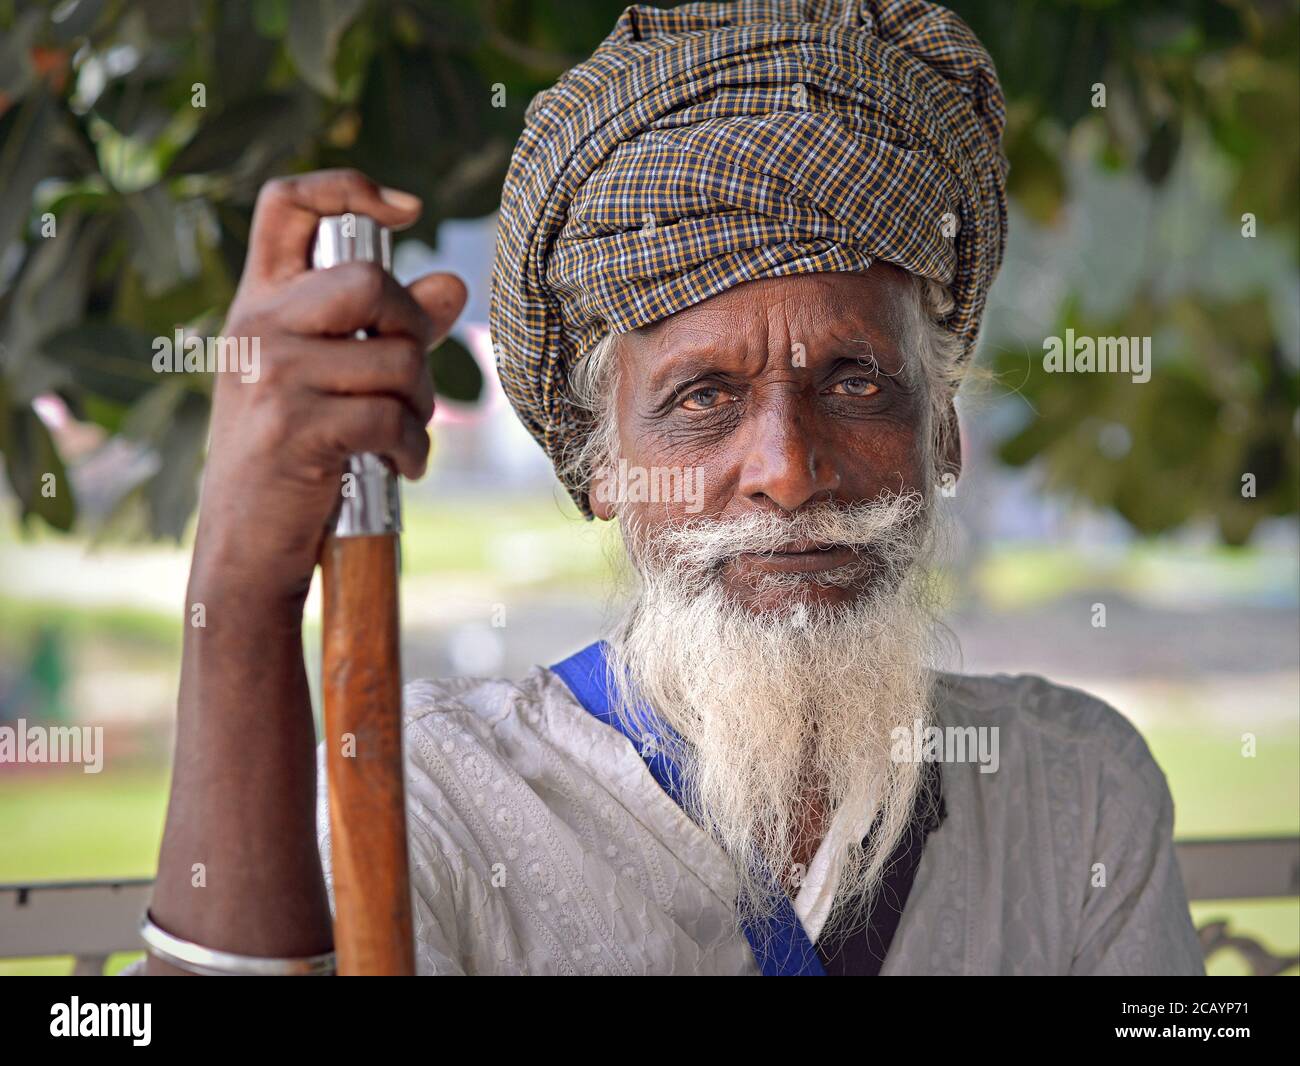 Old Indian Sikh devotee with bloodshot eyes rests on his walking stick and looks into the camera. Stock Photo